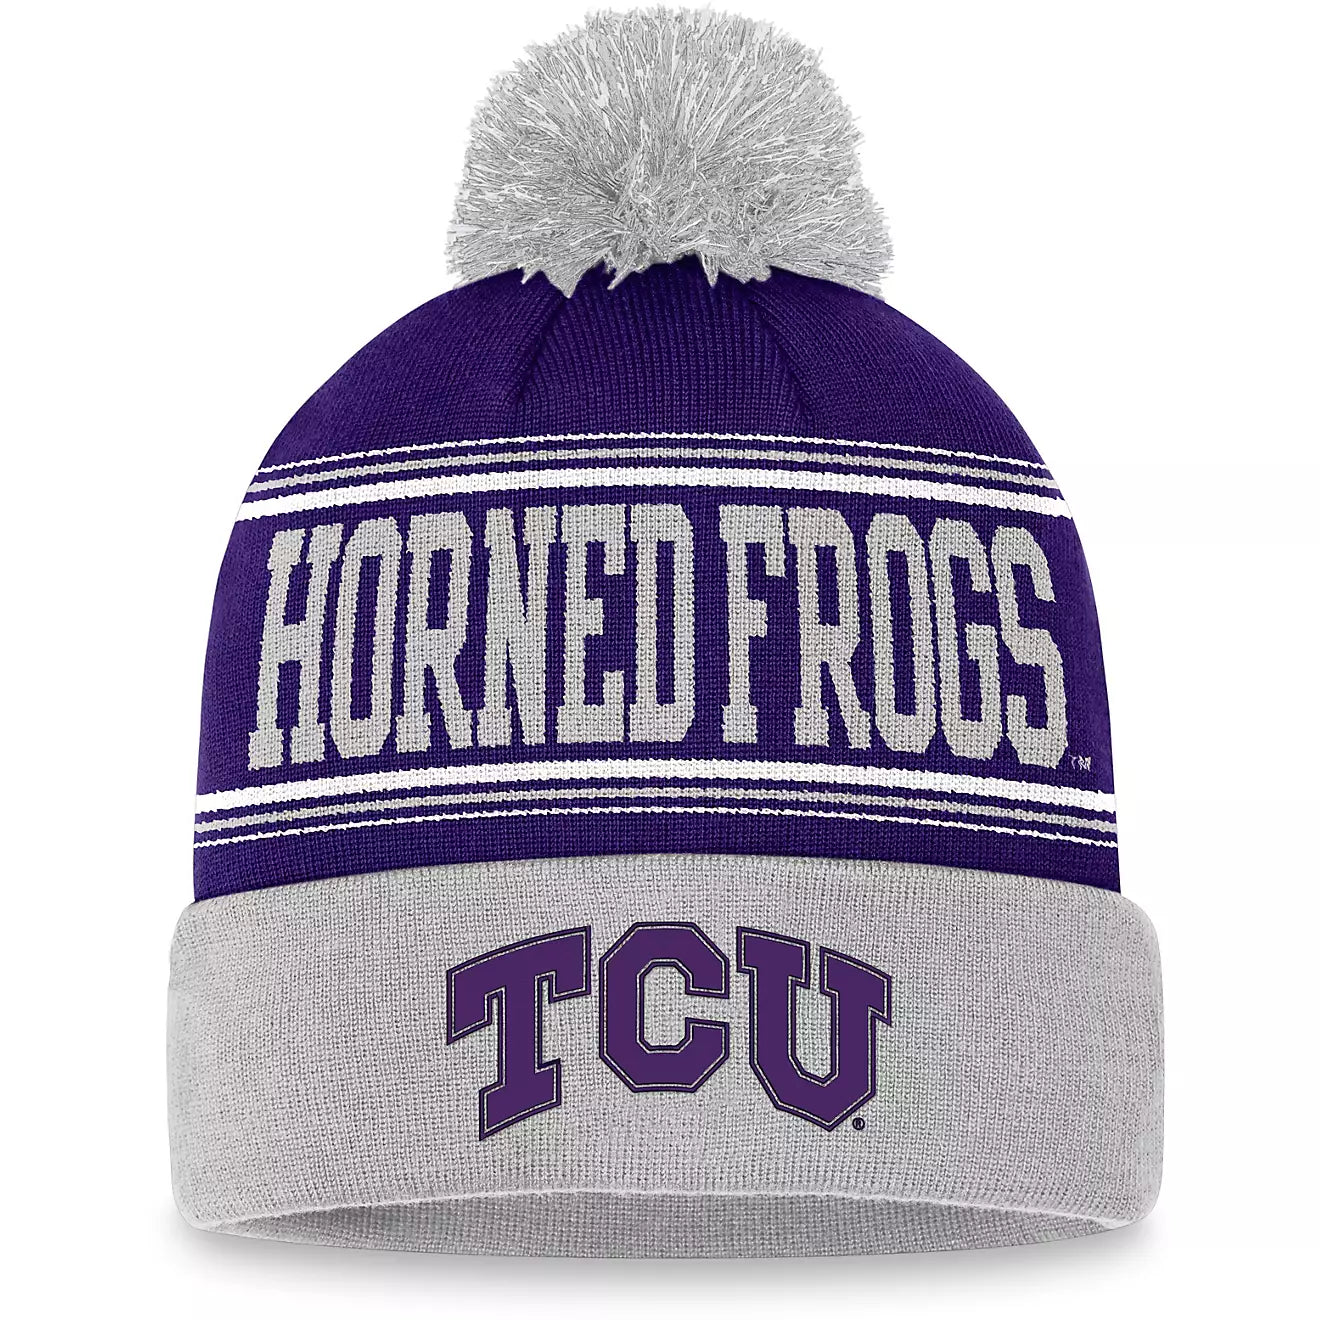 TCU Horned Frogs Top of the World Fashion Cuffed Pom Knit Hat